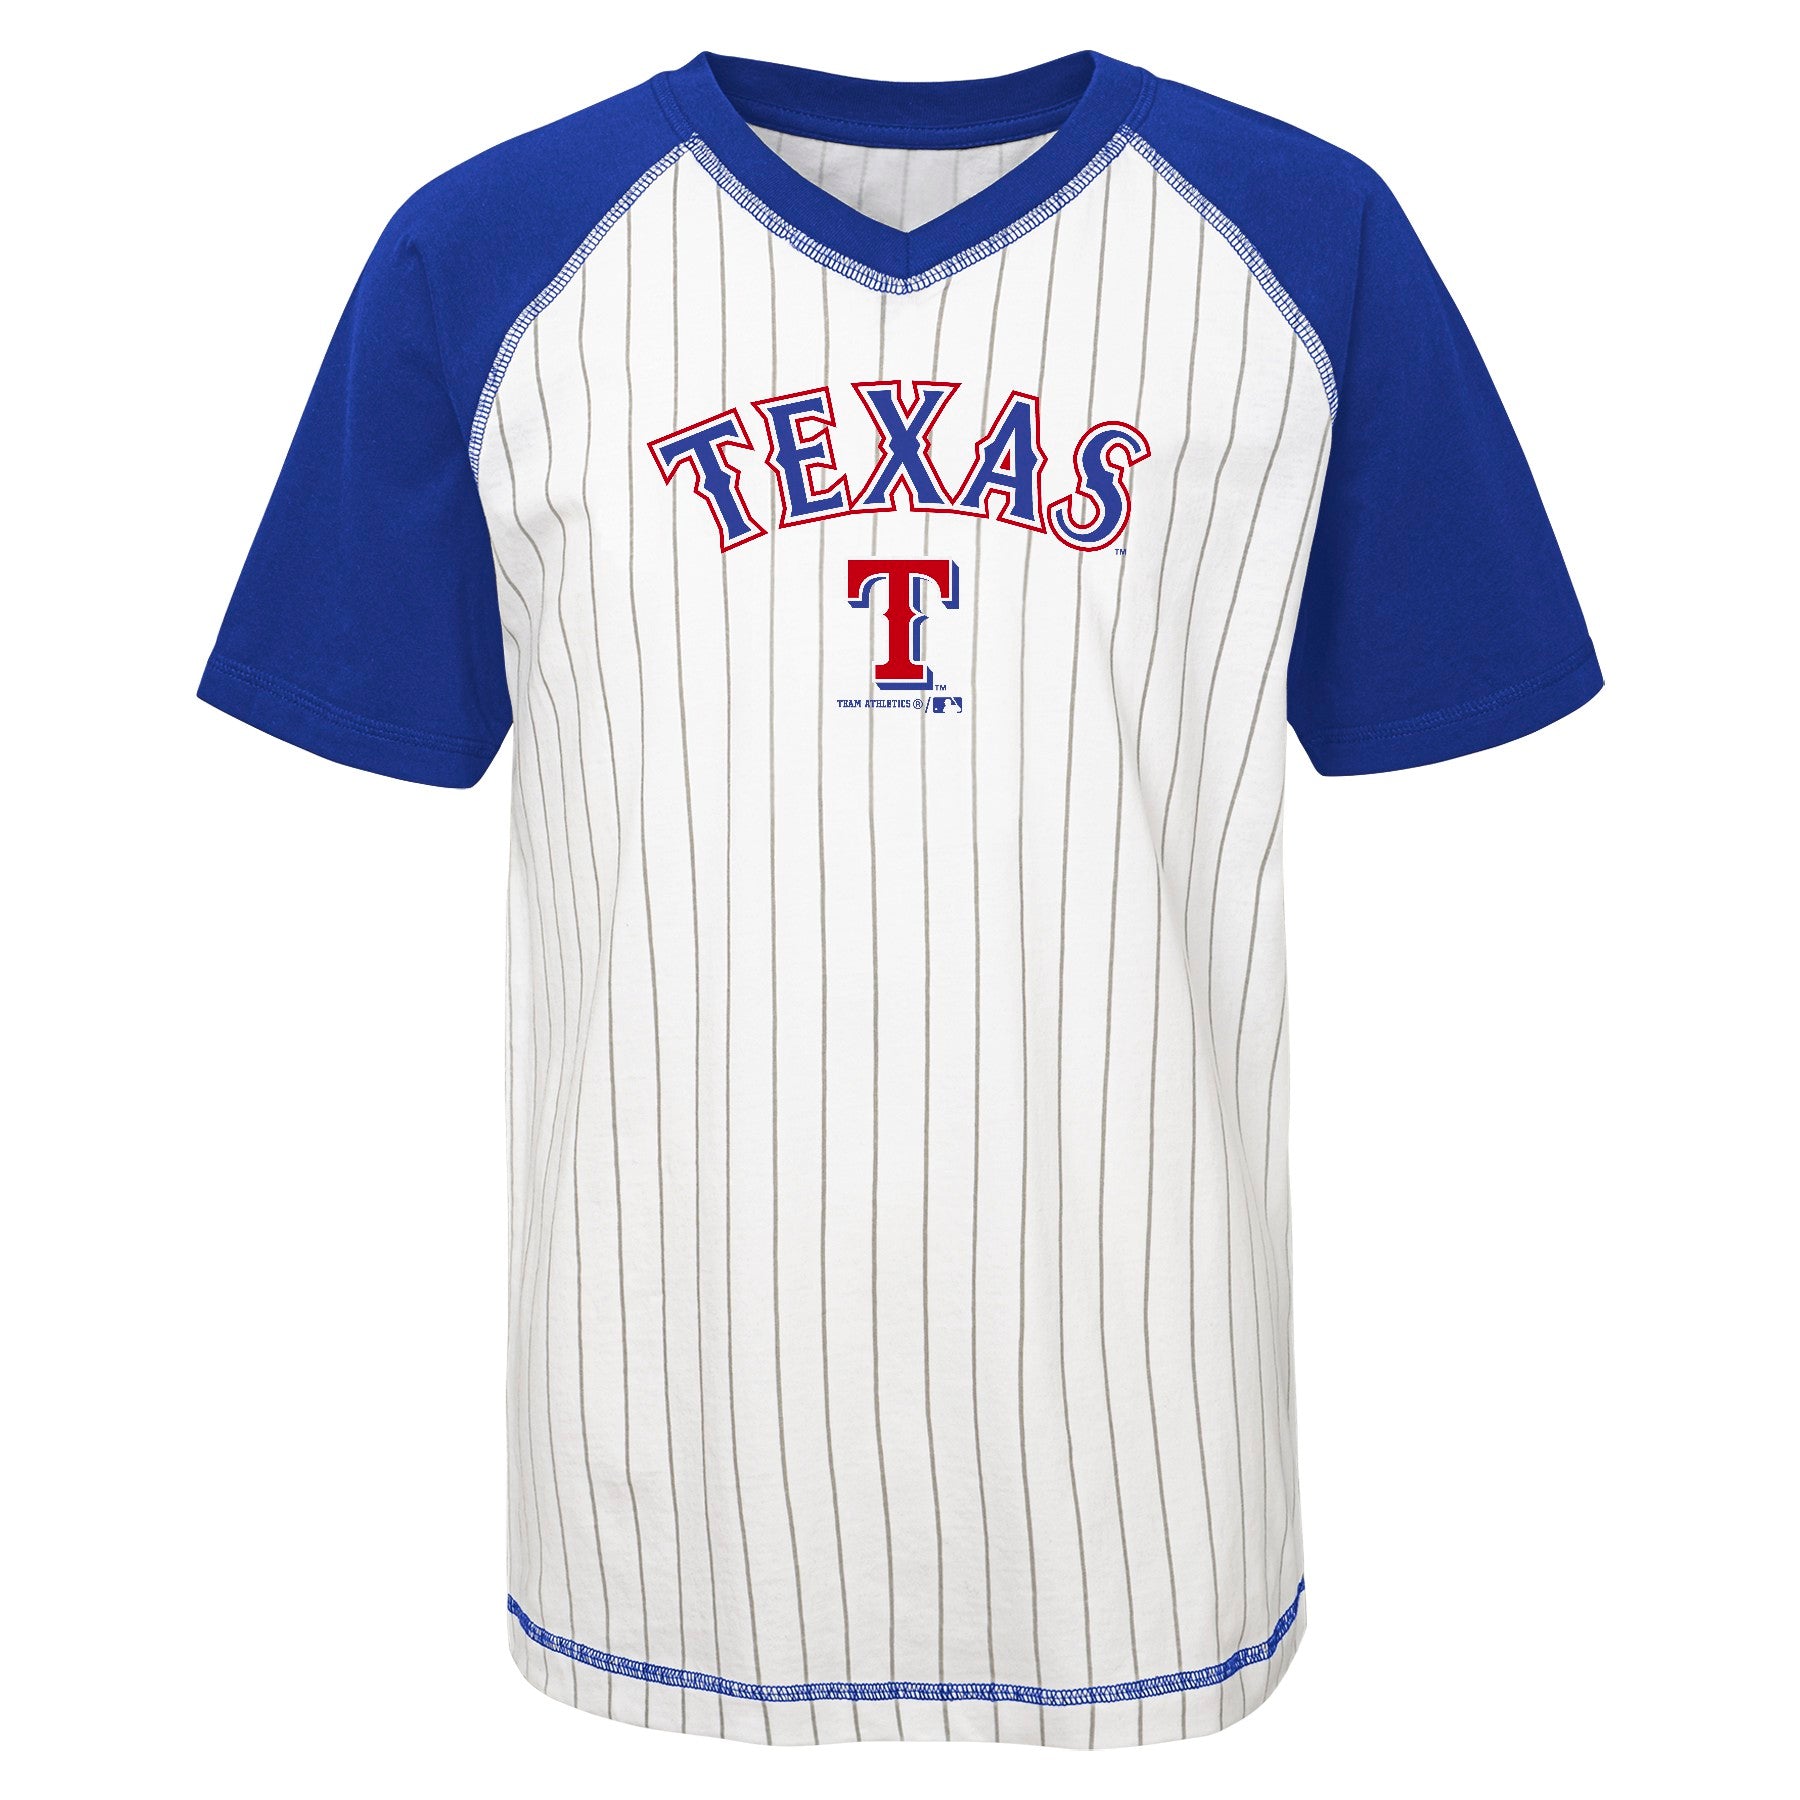 Outerstuff MLB Kids Youth (4-18) Pinstripe Team Color Baseball Tee